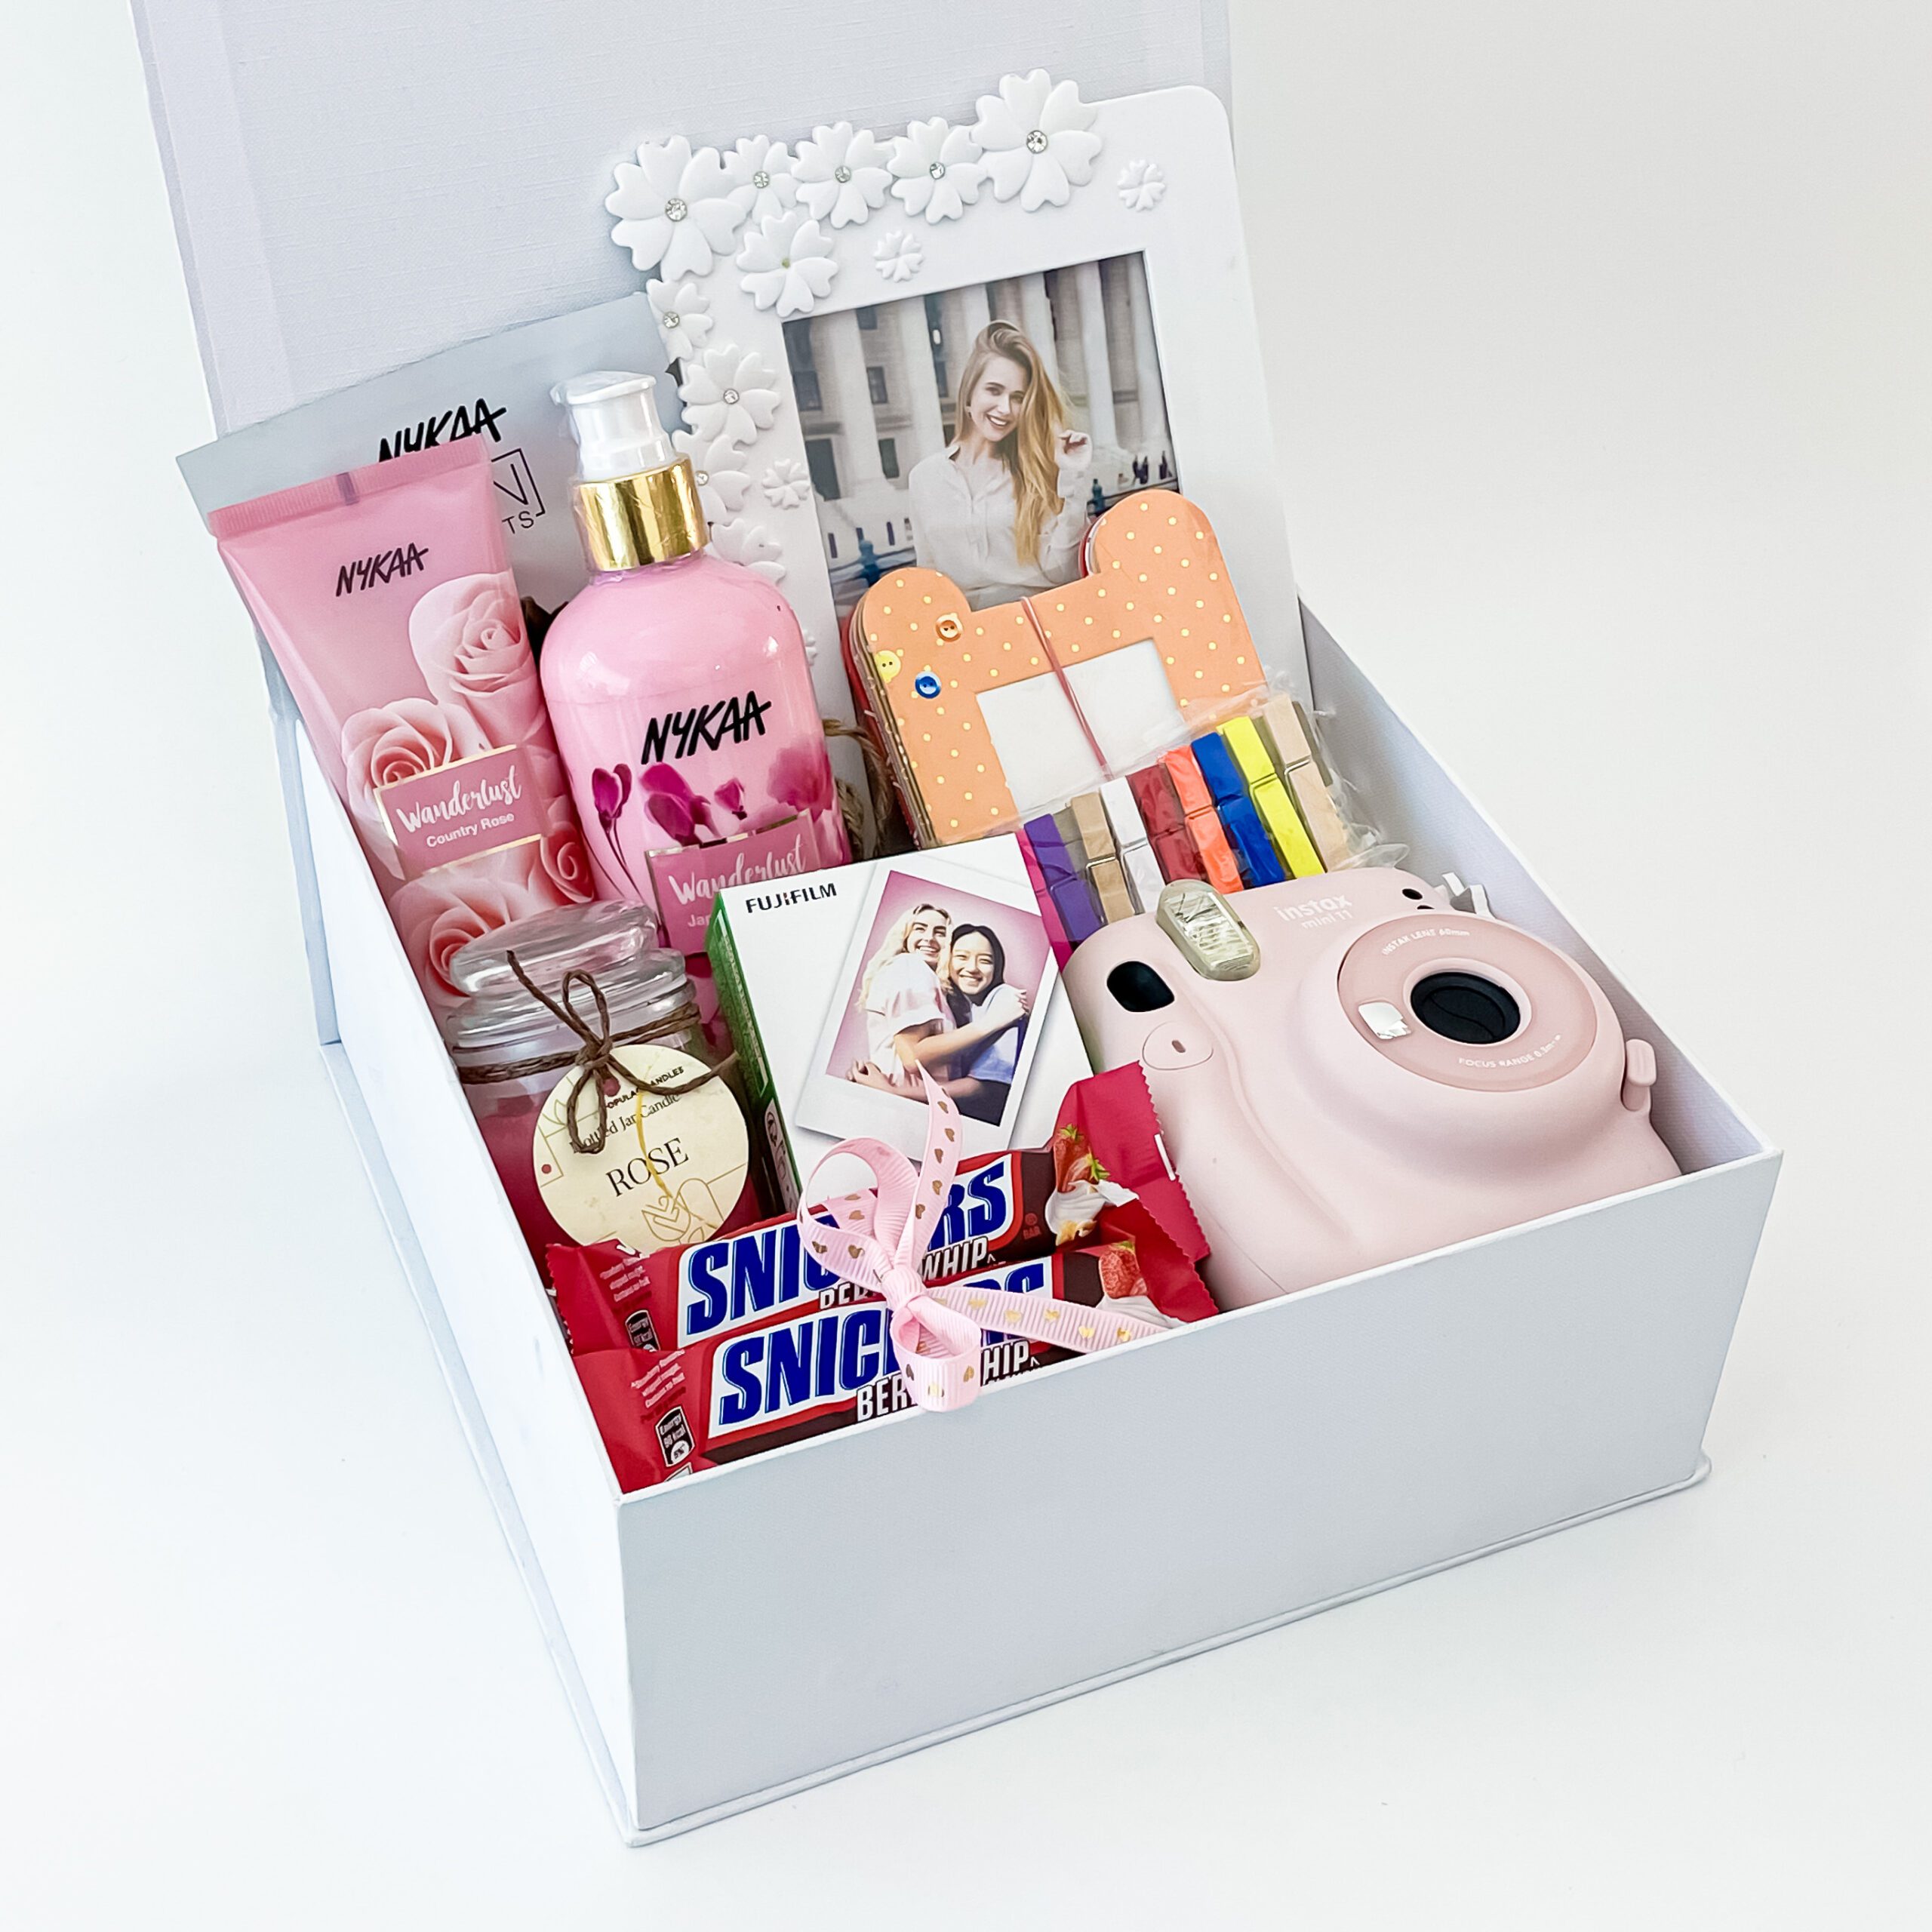 Bride-to-be Gift hamper – The Gifts Quest